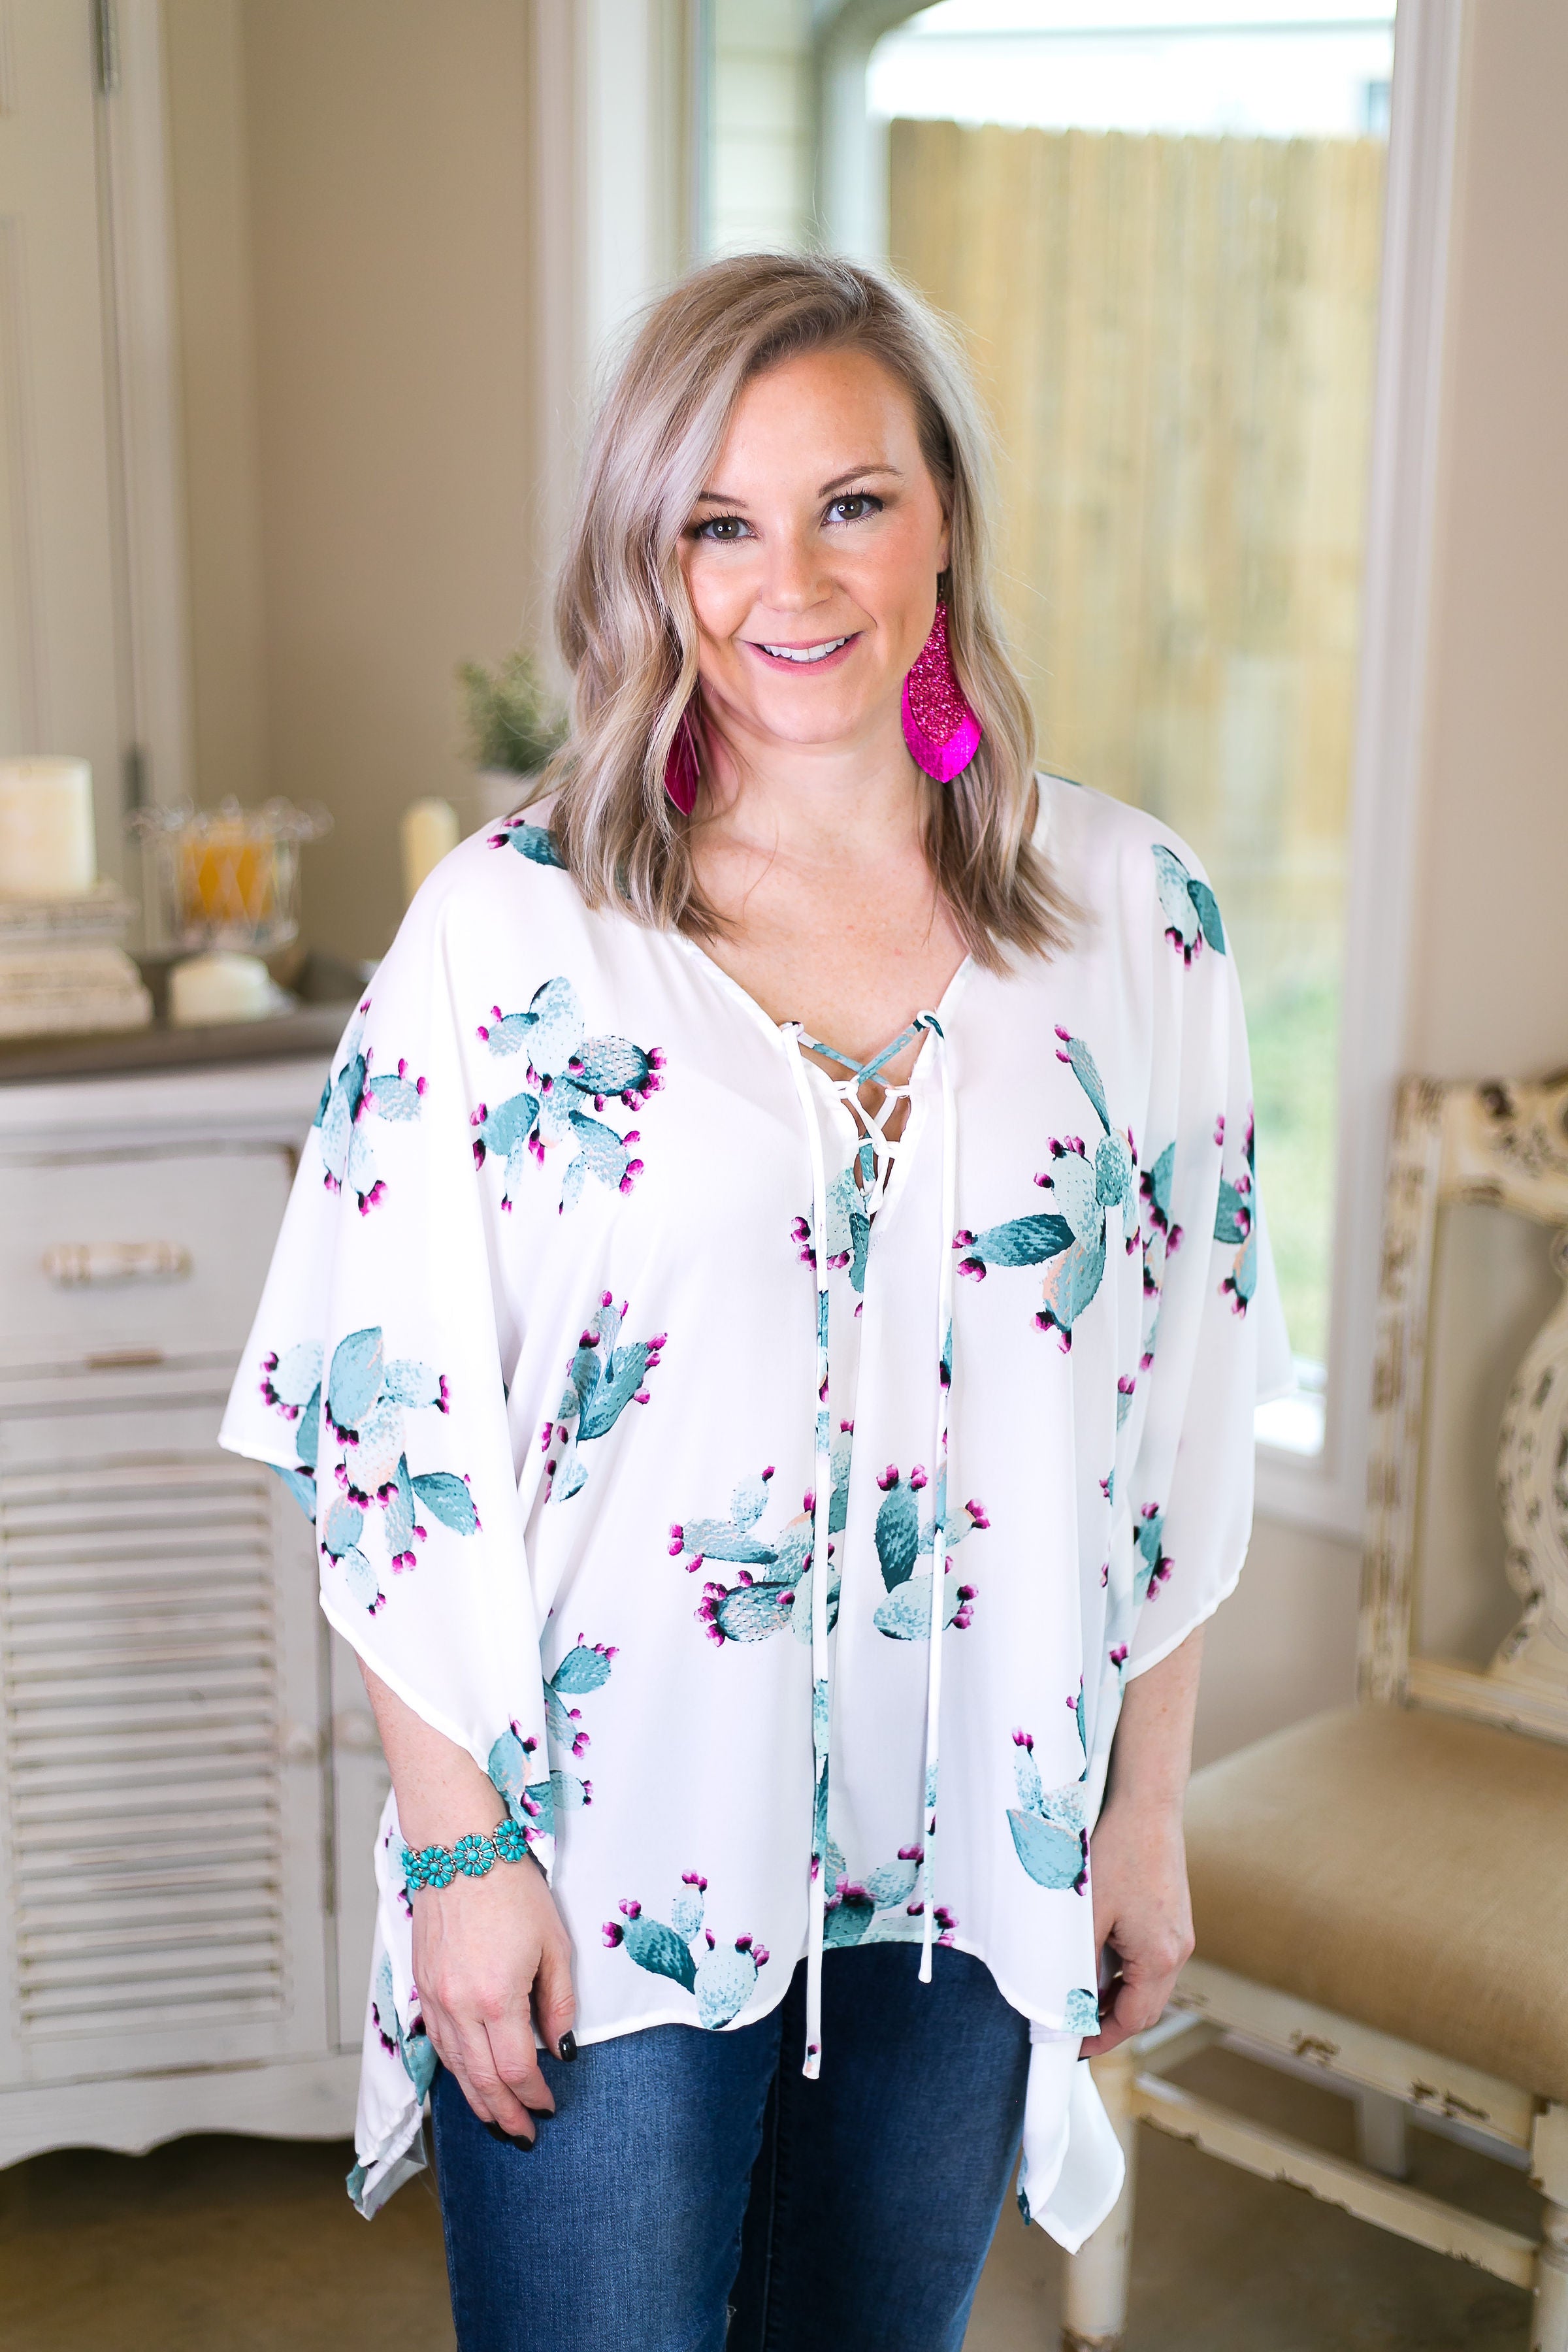 Last Chance Size S/M | This Is Happiness Oversized Poncho Top with Lace Up Detail in Cactus Print - Giddy Up Glamour Boutique